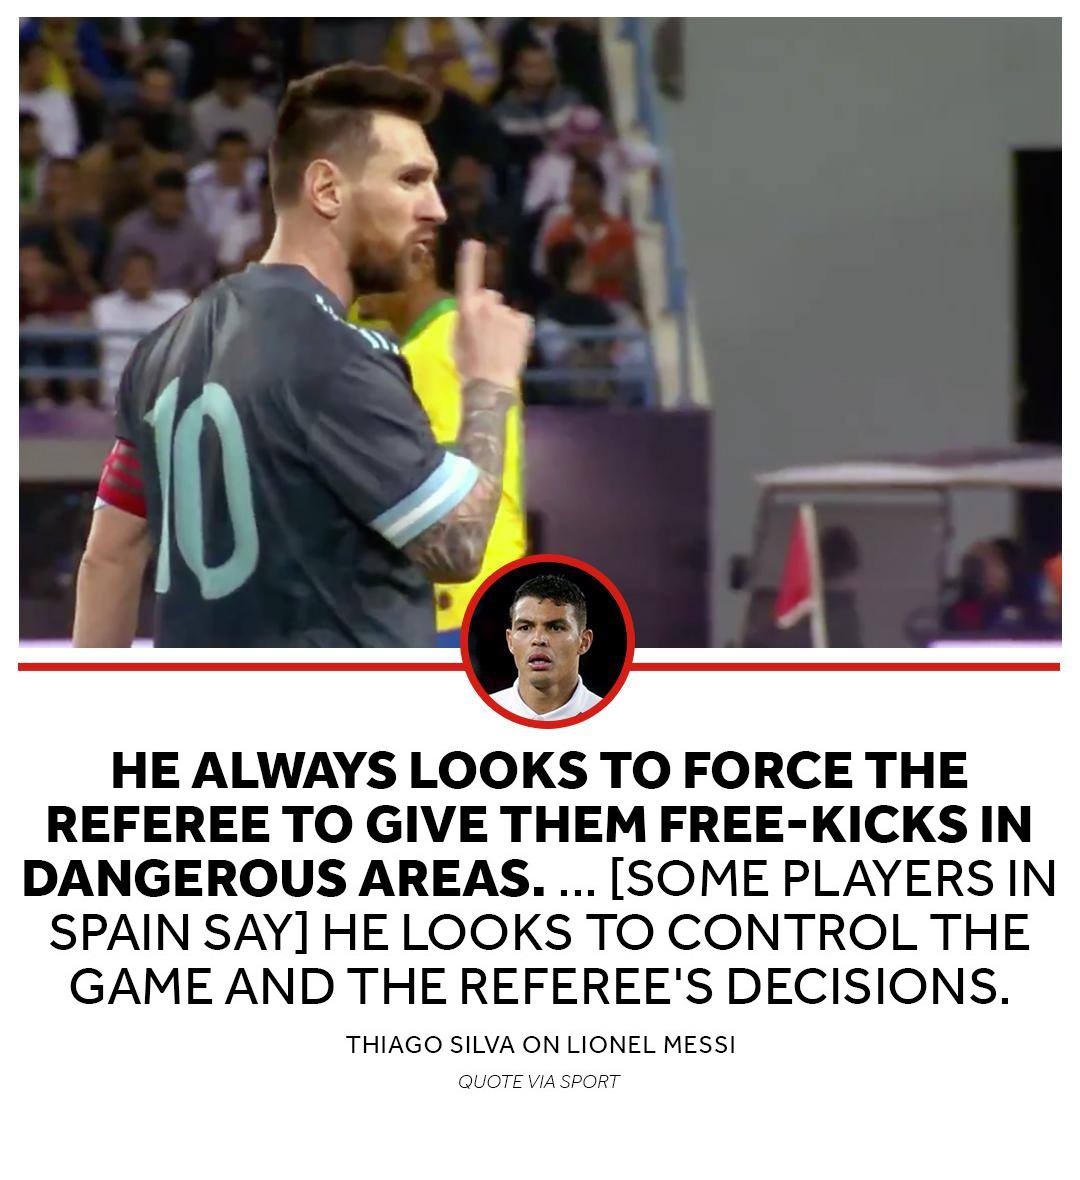 Thiago Silva had alerted us about Messi's career 😭😭😭